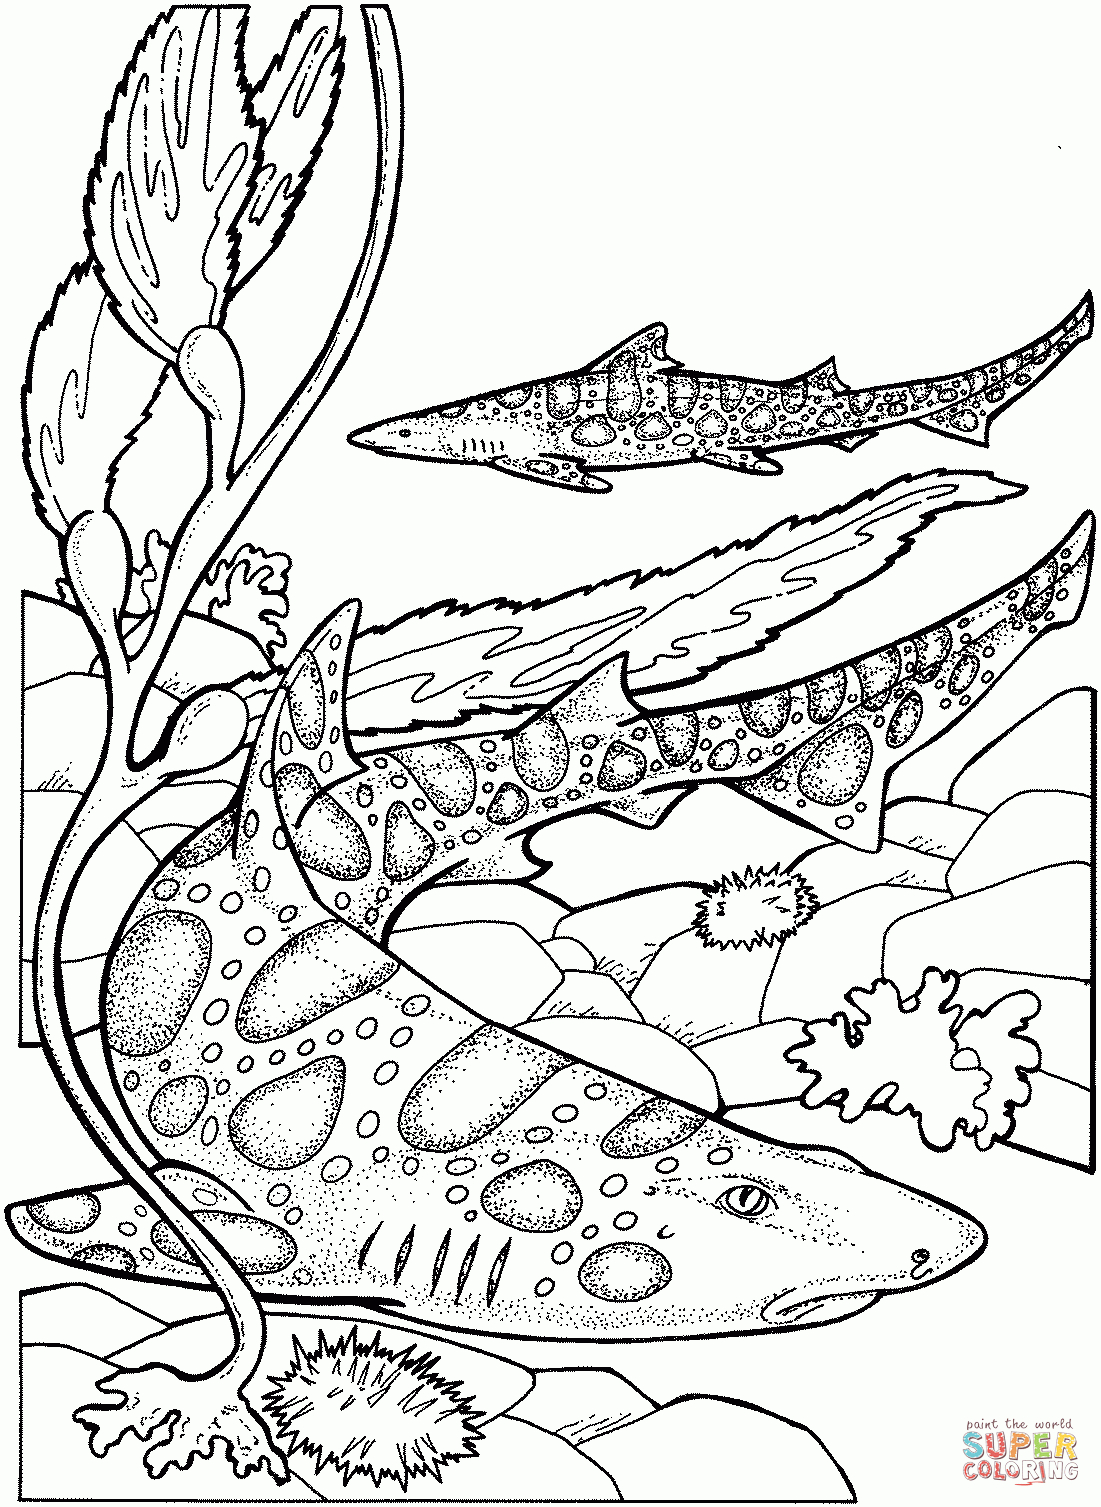 Leopard Sharks Coloring Page | Free Printable Coloring Pages - Free Printable Shark Coloring Pages